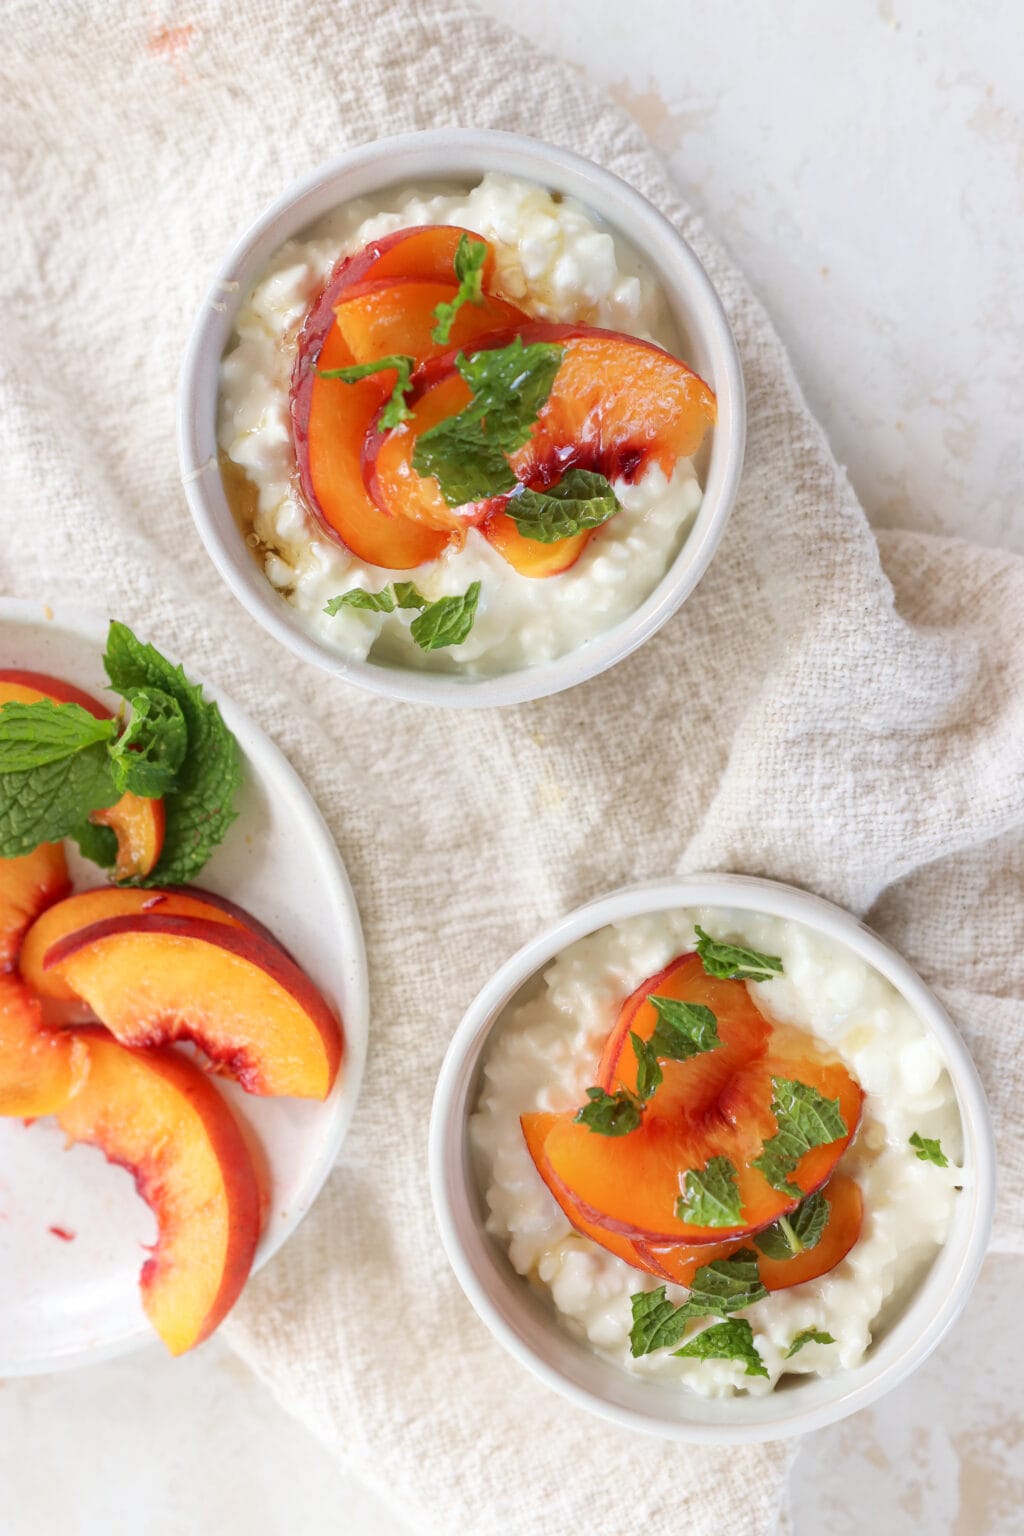 Two white bowls are filled with cottage cheese, sliced peaches and mint. To the left of the bowls is a plate of sliced peaches with mint 